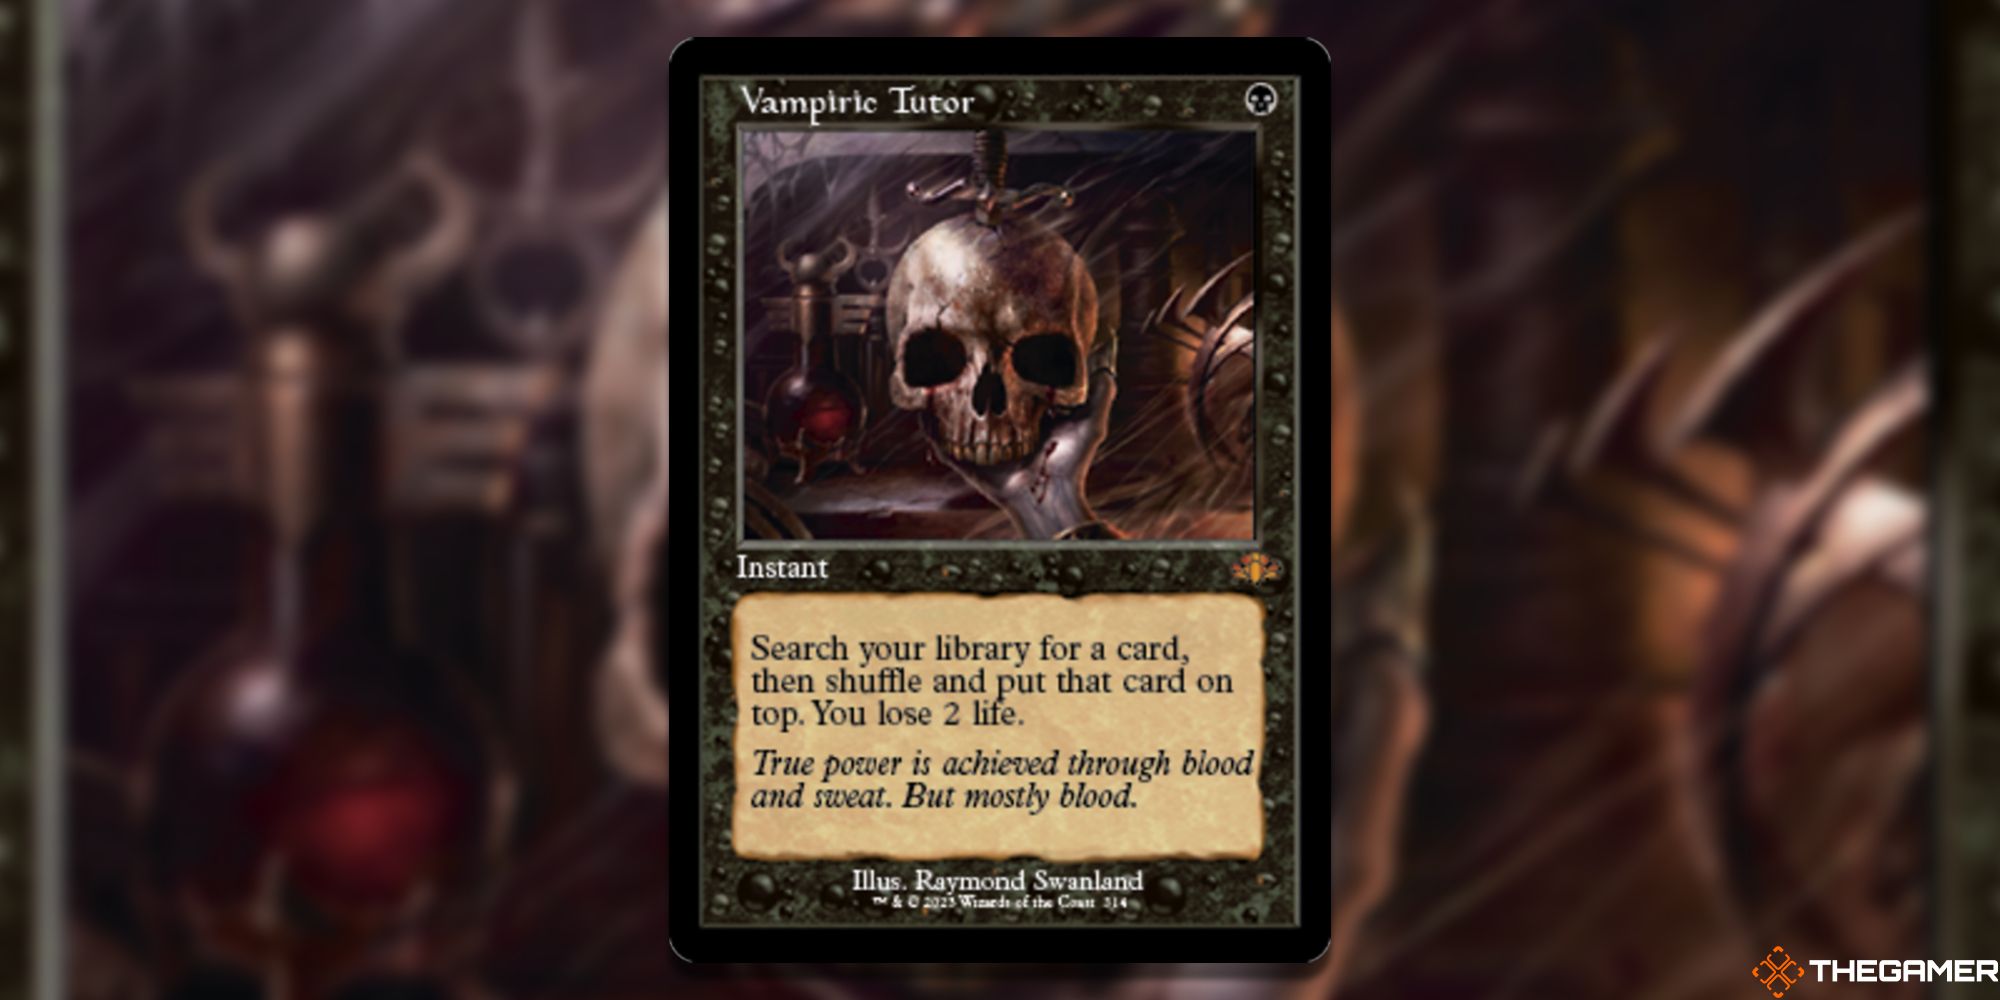 Image of the Vampiric Tutor Retro Frame card in Magic: The Gathering, with art by Raymond Swanland